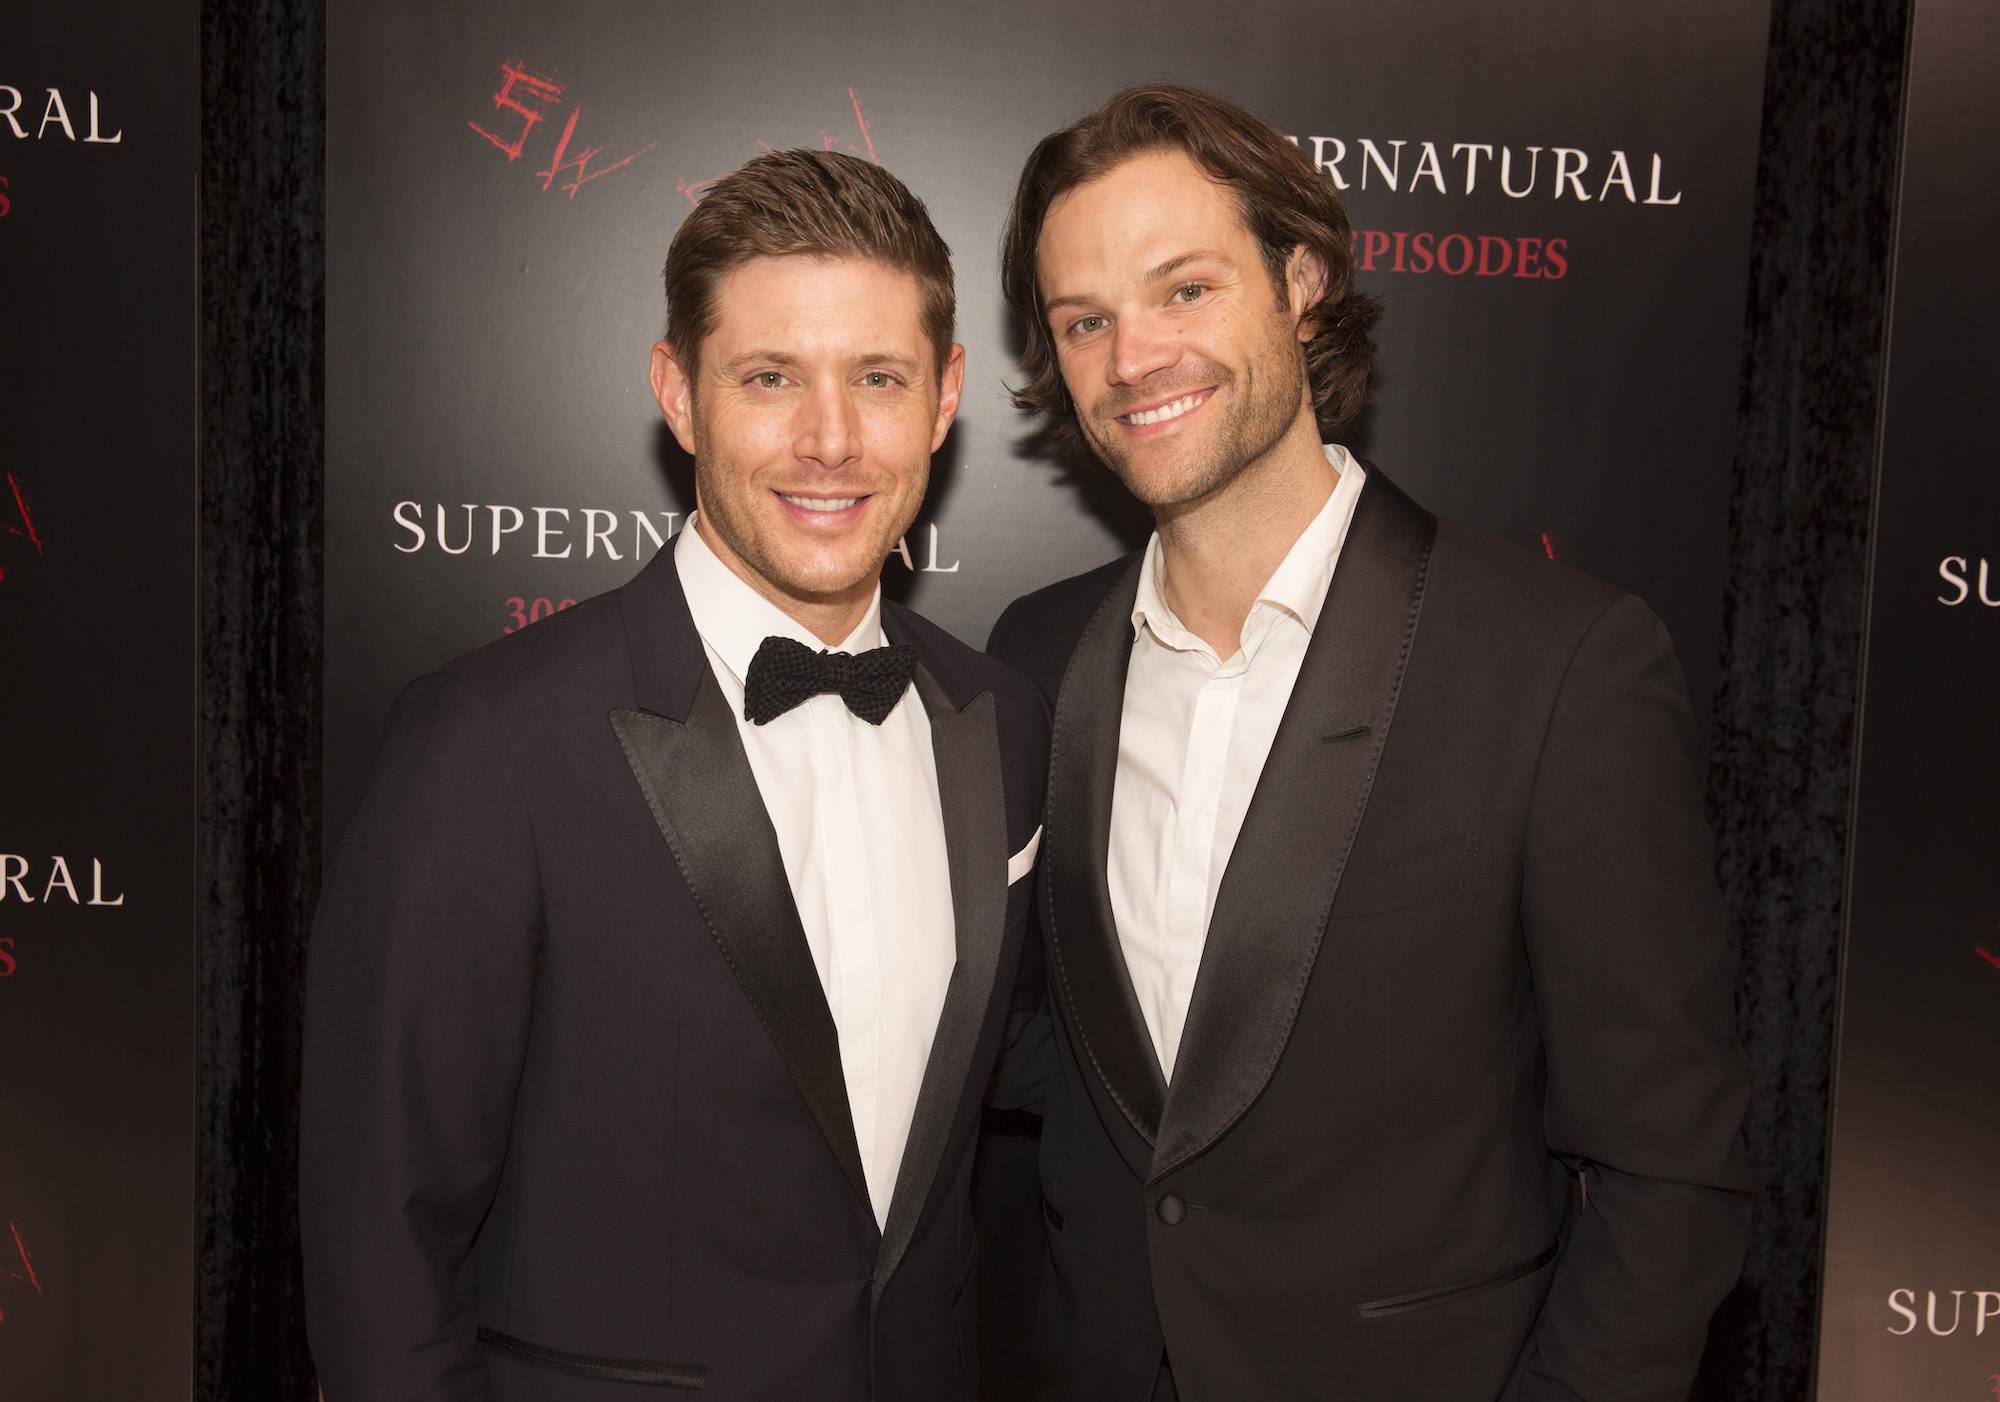 (L-R) Jensen Ackles and Jared Padalecki smiling in front of a black background